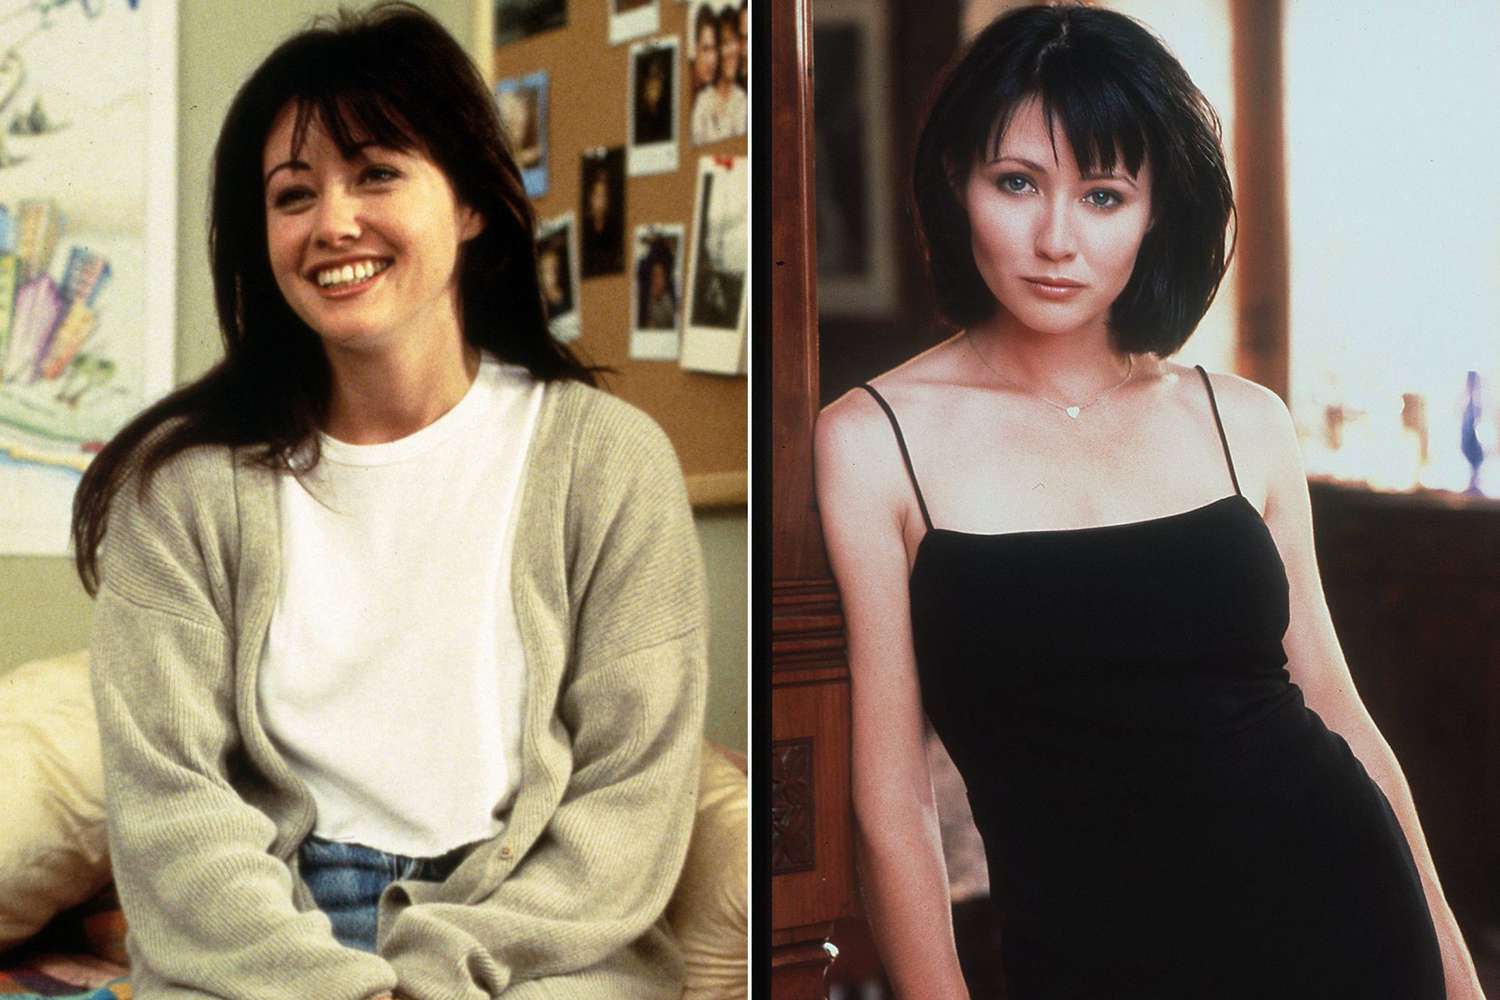 Beverly Hills, 90210 and Charmed